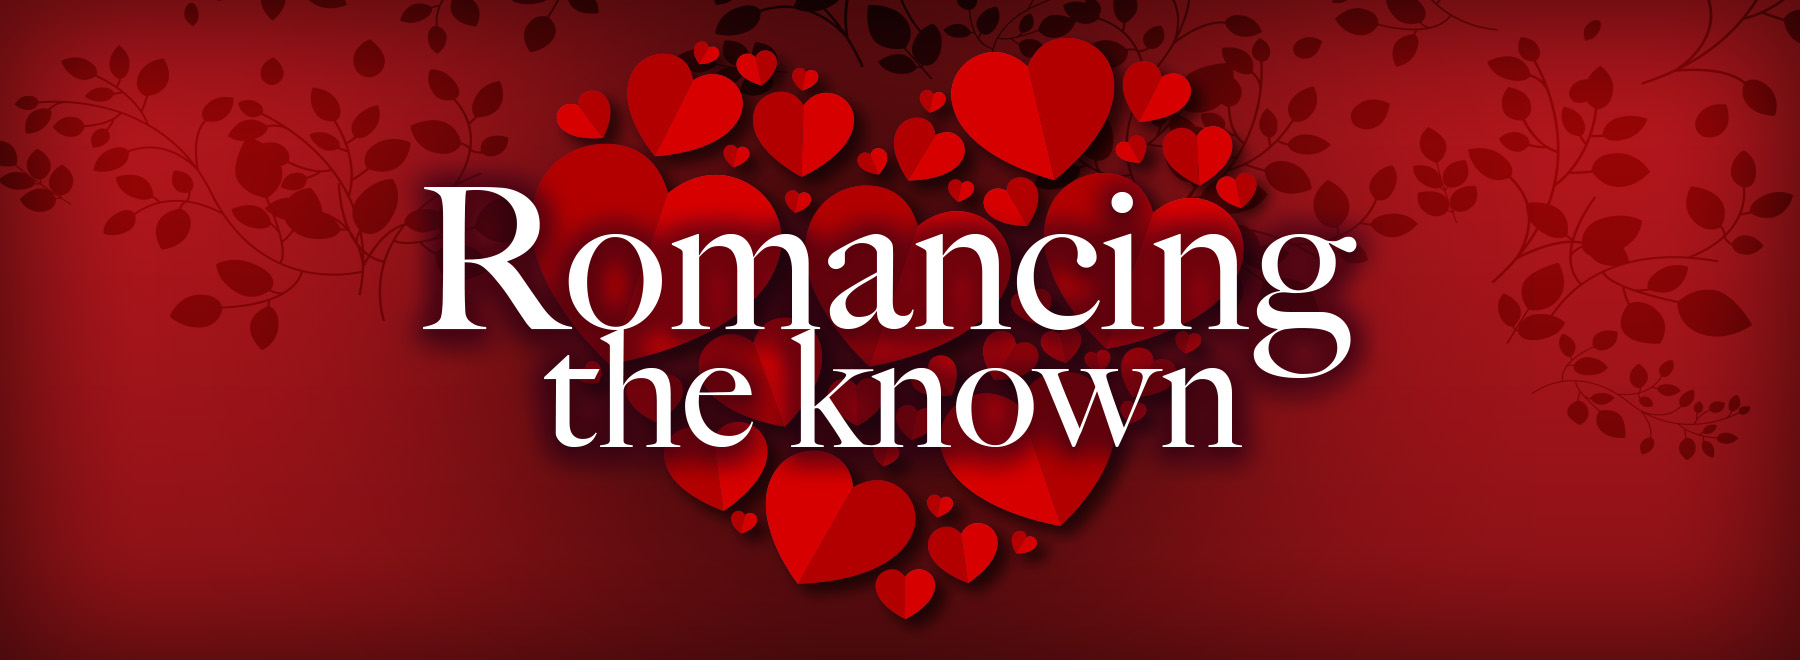 Romancing the known banner